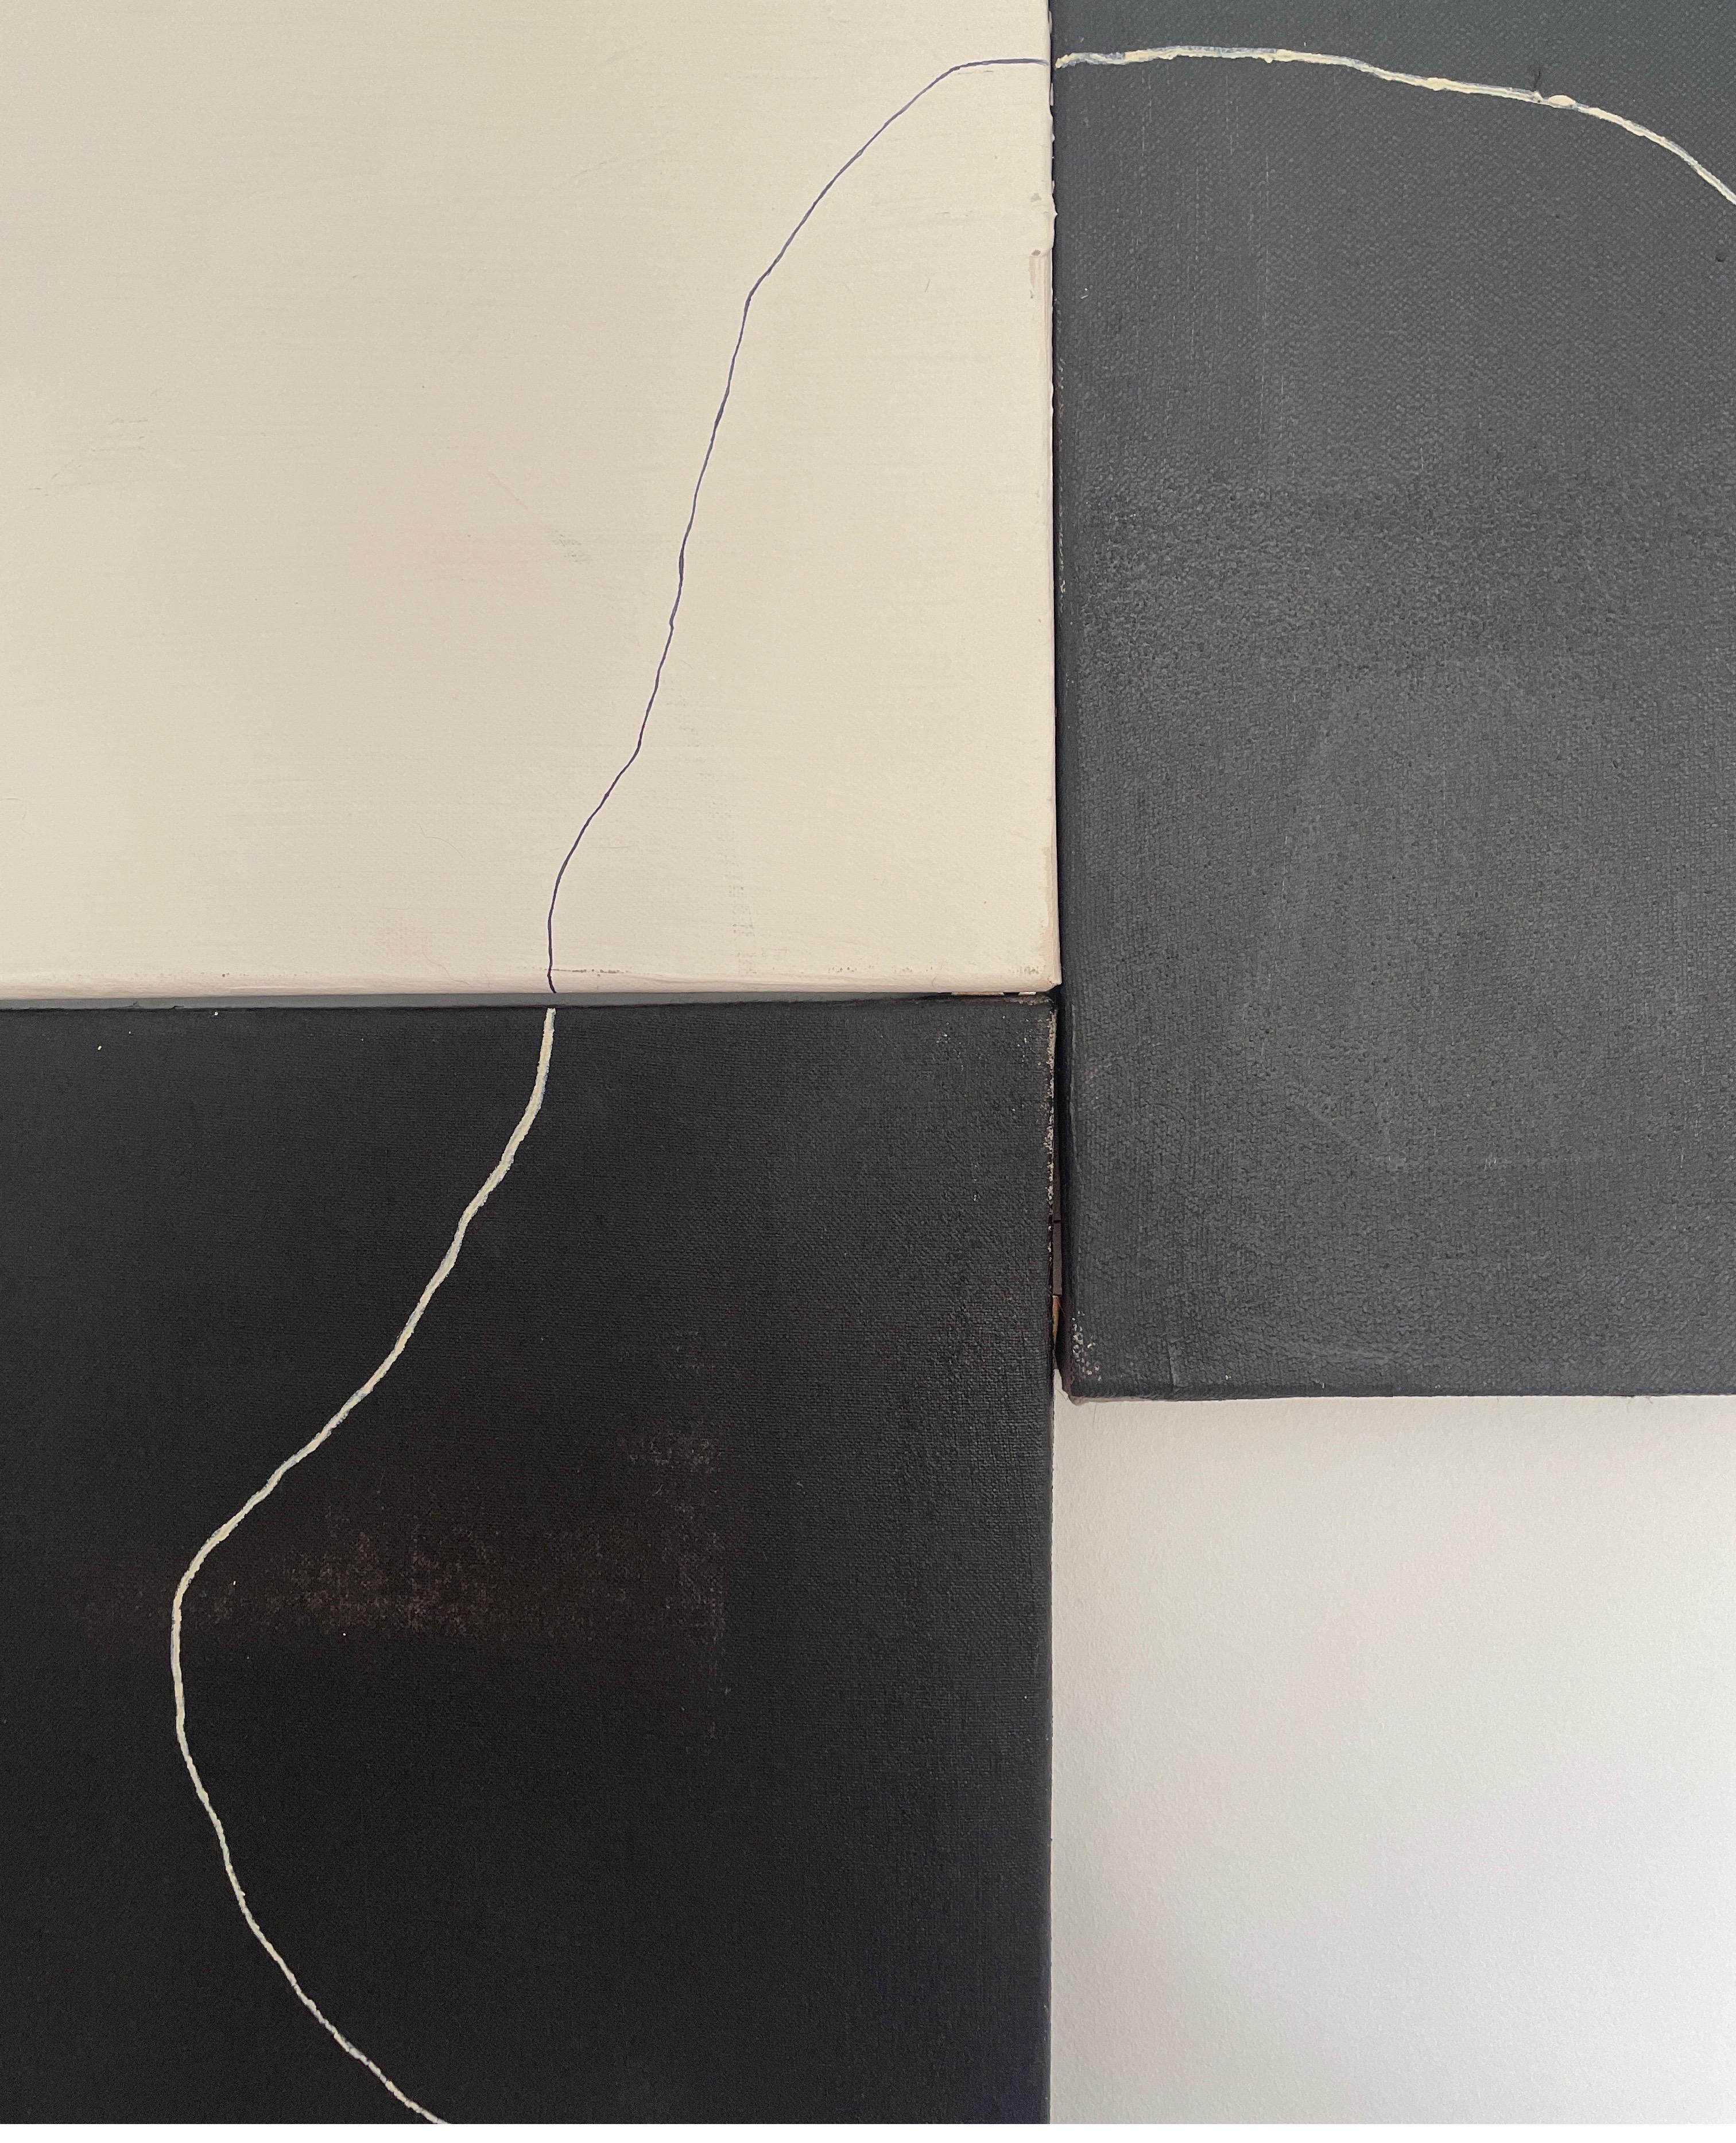 ABSTRACT. Triptych Black white painting by Spanish Artist minimal Untitled 2023 - Painting by Alicia Gimeno